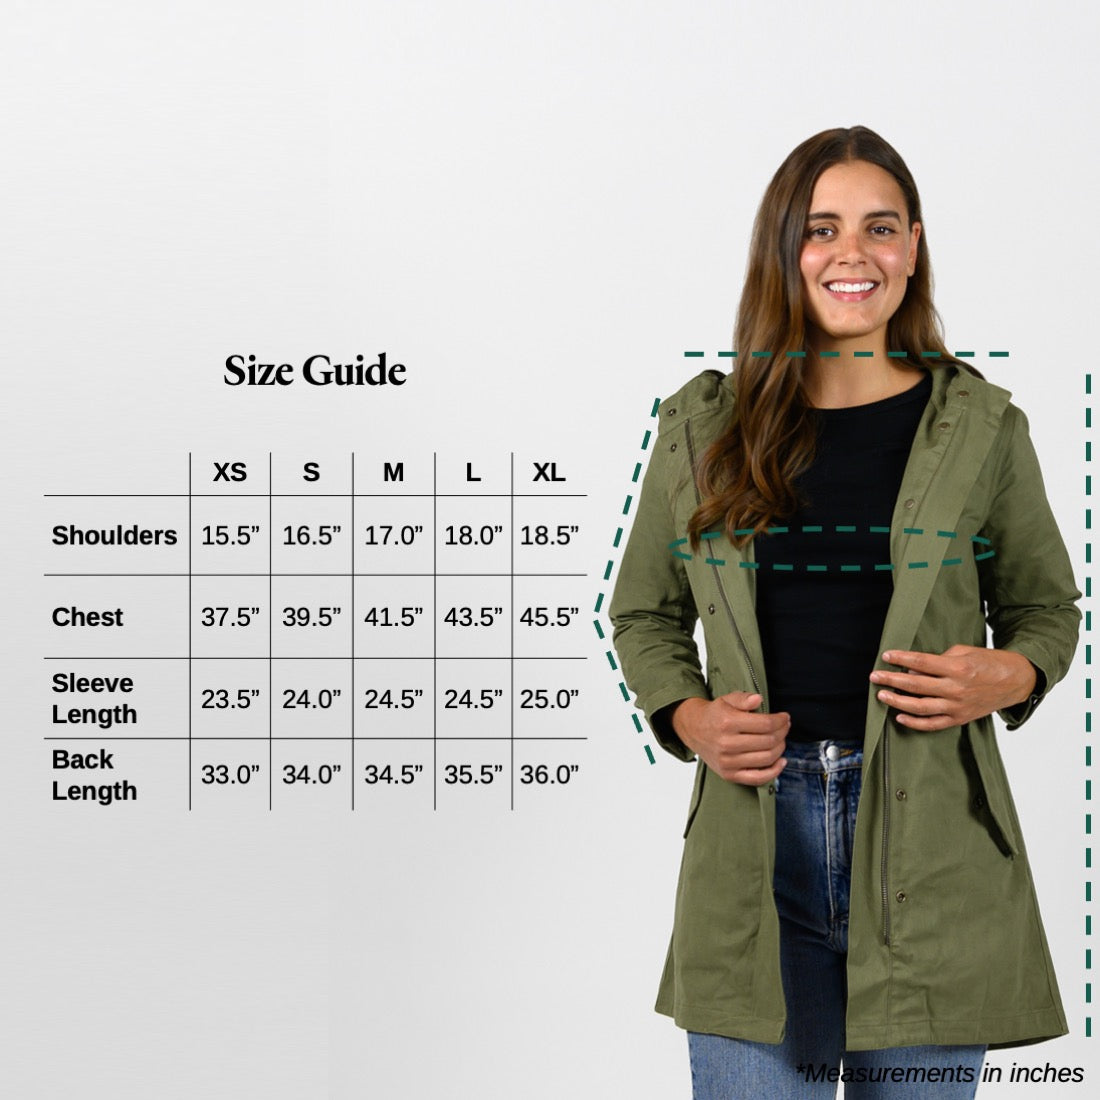 Your Field Jacket